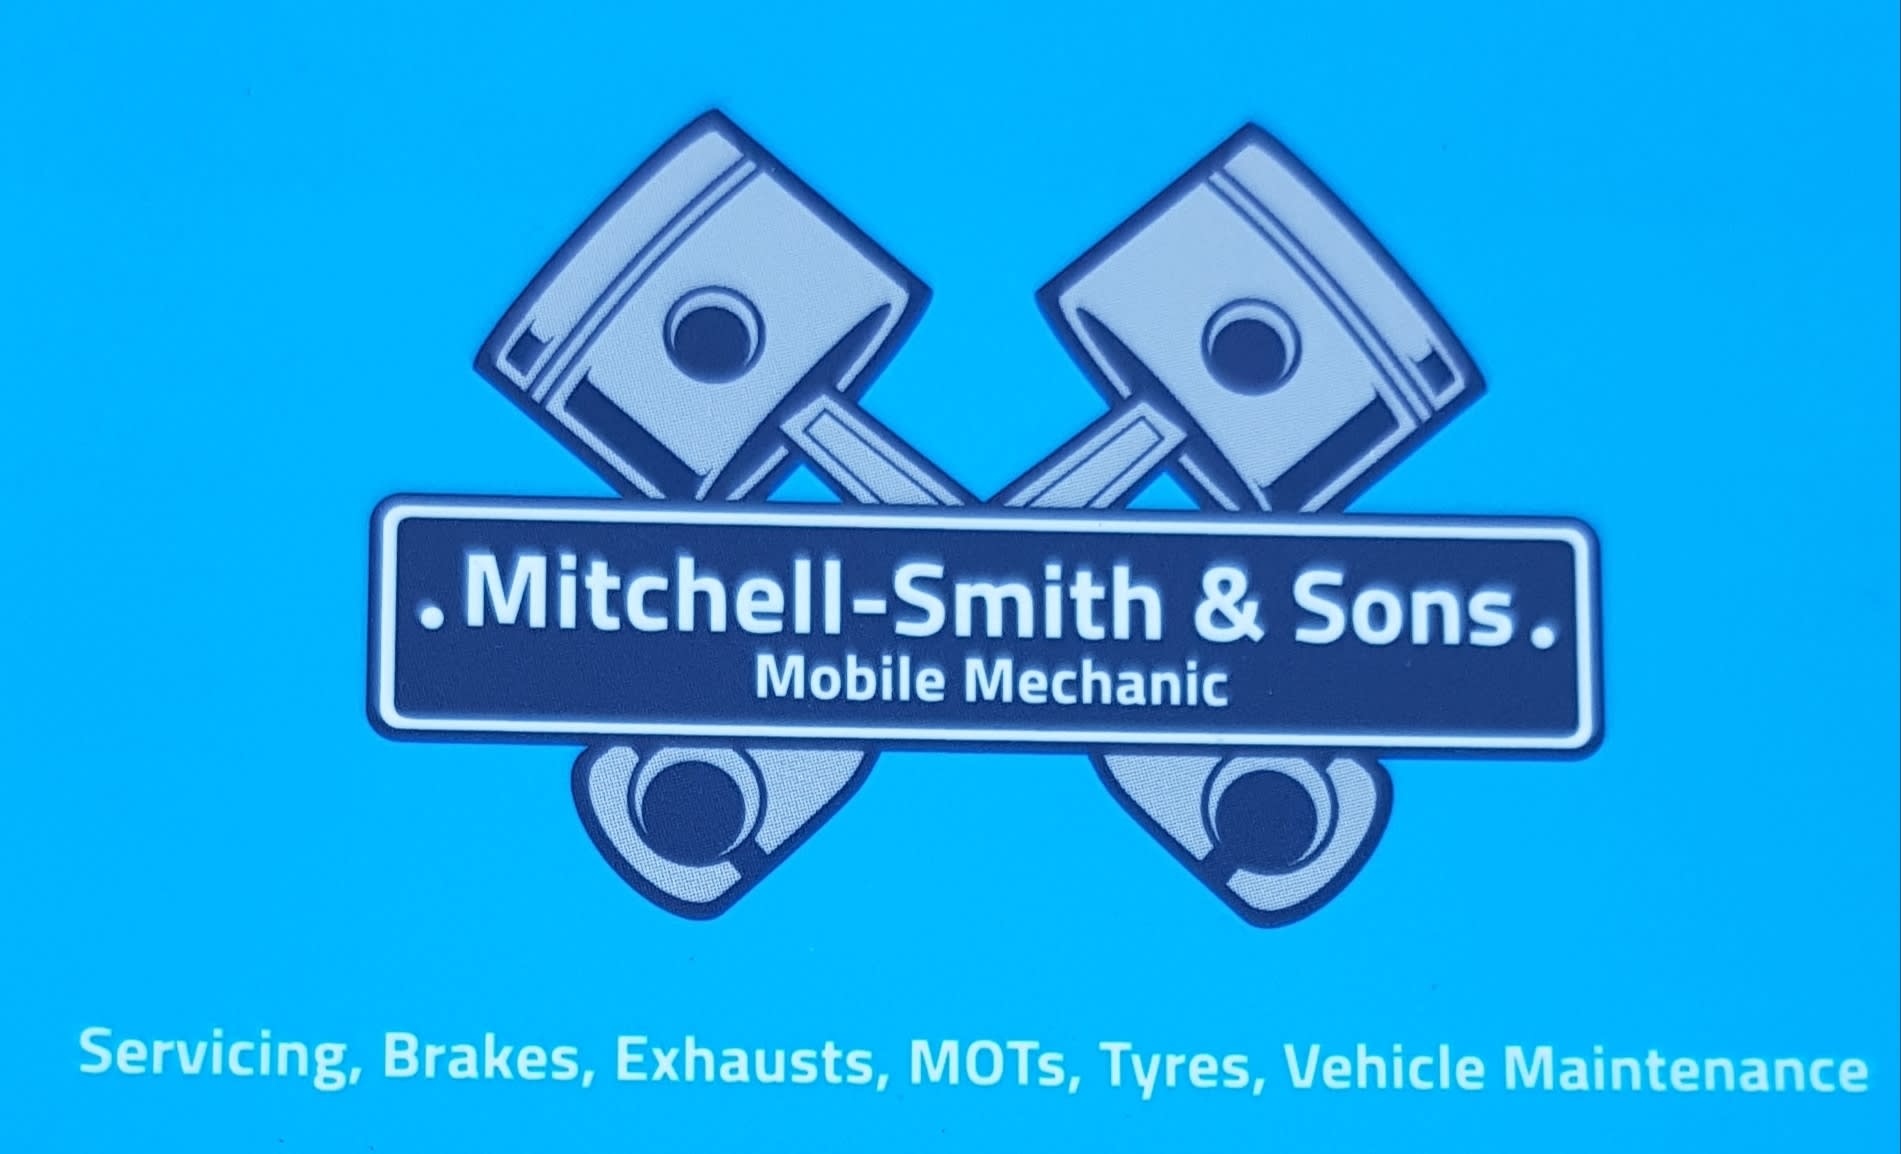 Mitchell-Smith & Sons